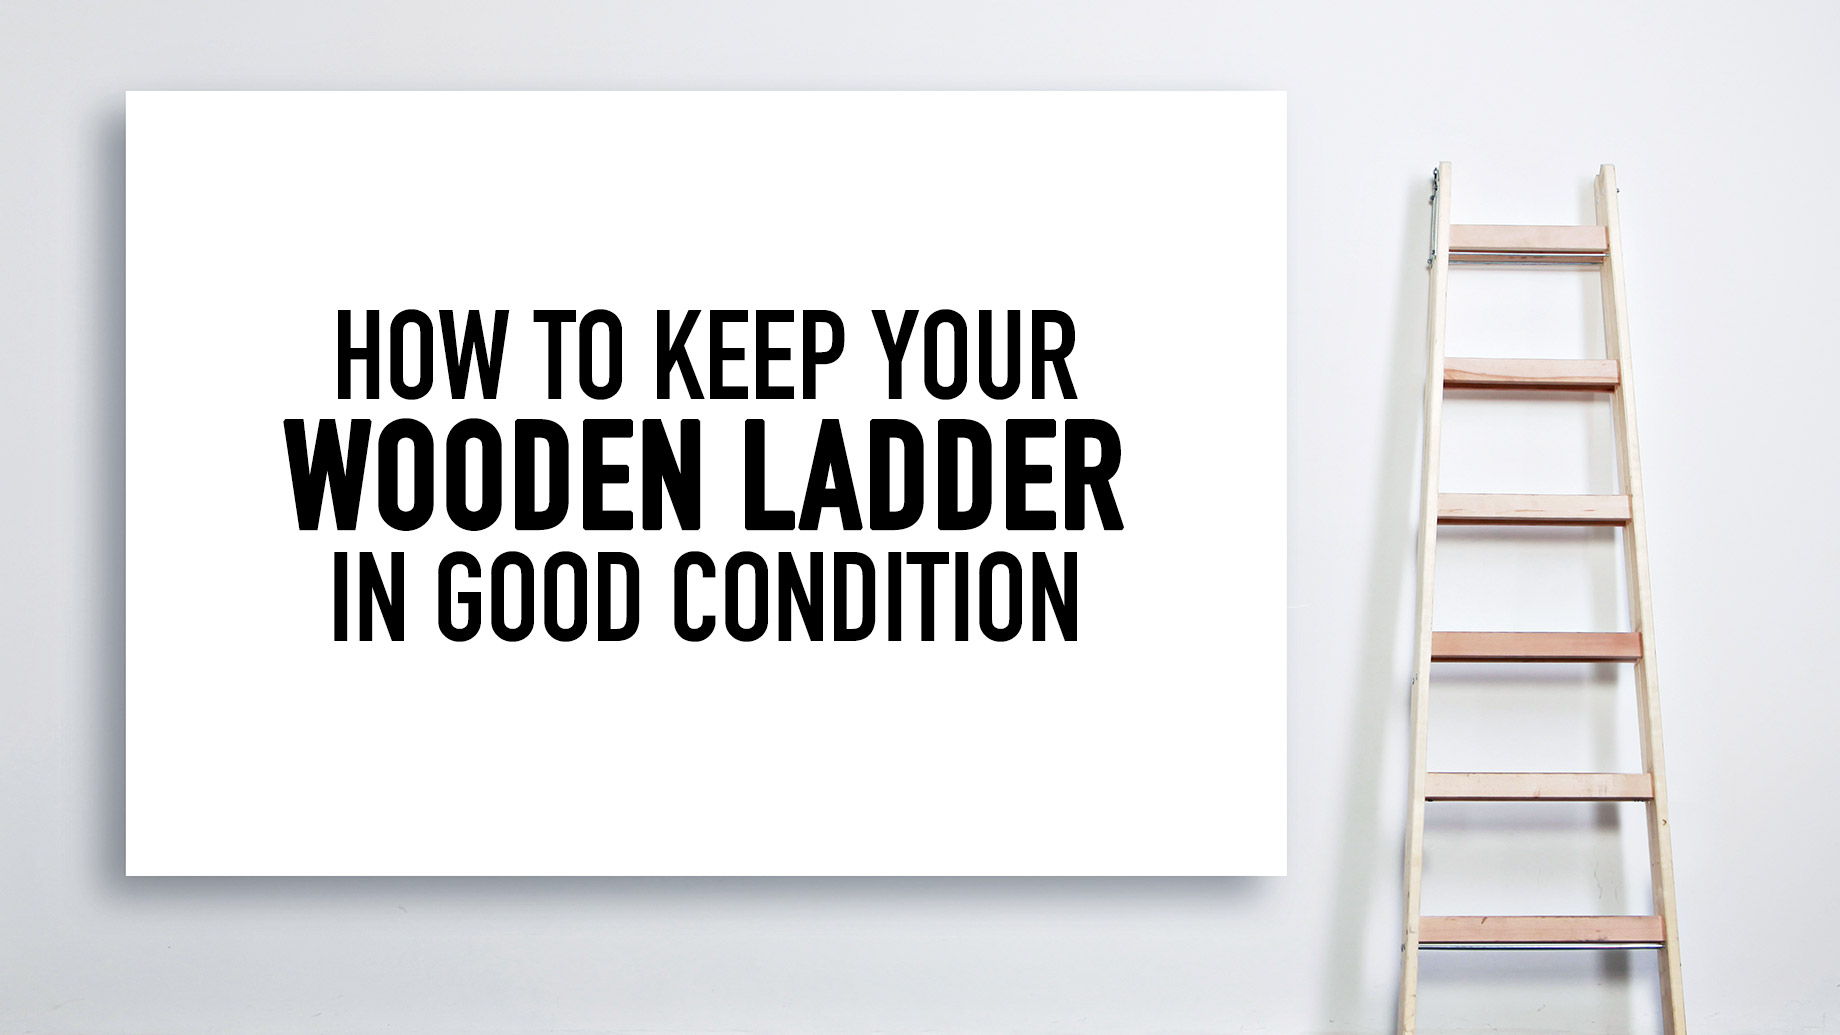 How to Keep Your Wooden Ladder in Good Condition